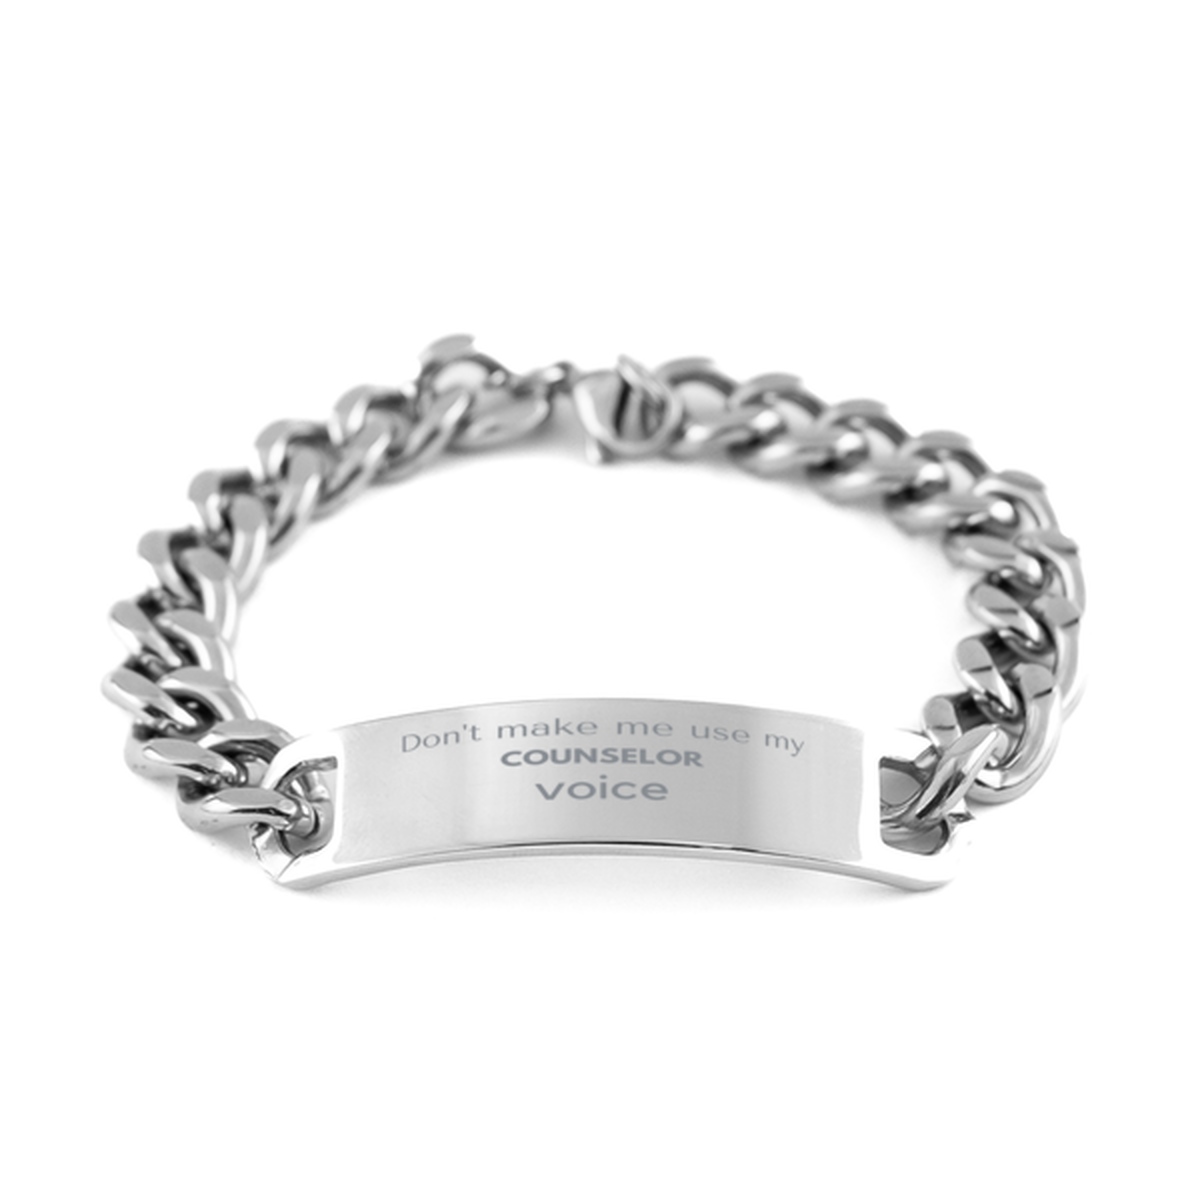 Don't make me use my Counselor voice, Sarcasm Counselor Gifts, Christmas Counselor Cuban Chain Stainless Steel Bracelet Birthday Unique Gifts For Counselor Coworkers, Men, Women, Colleague, Friends